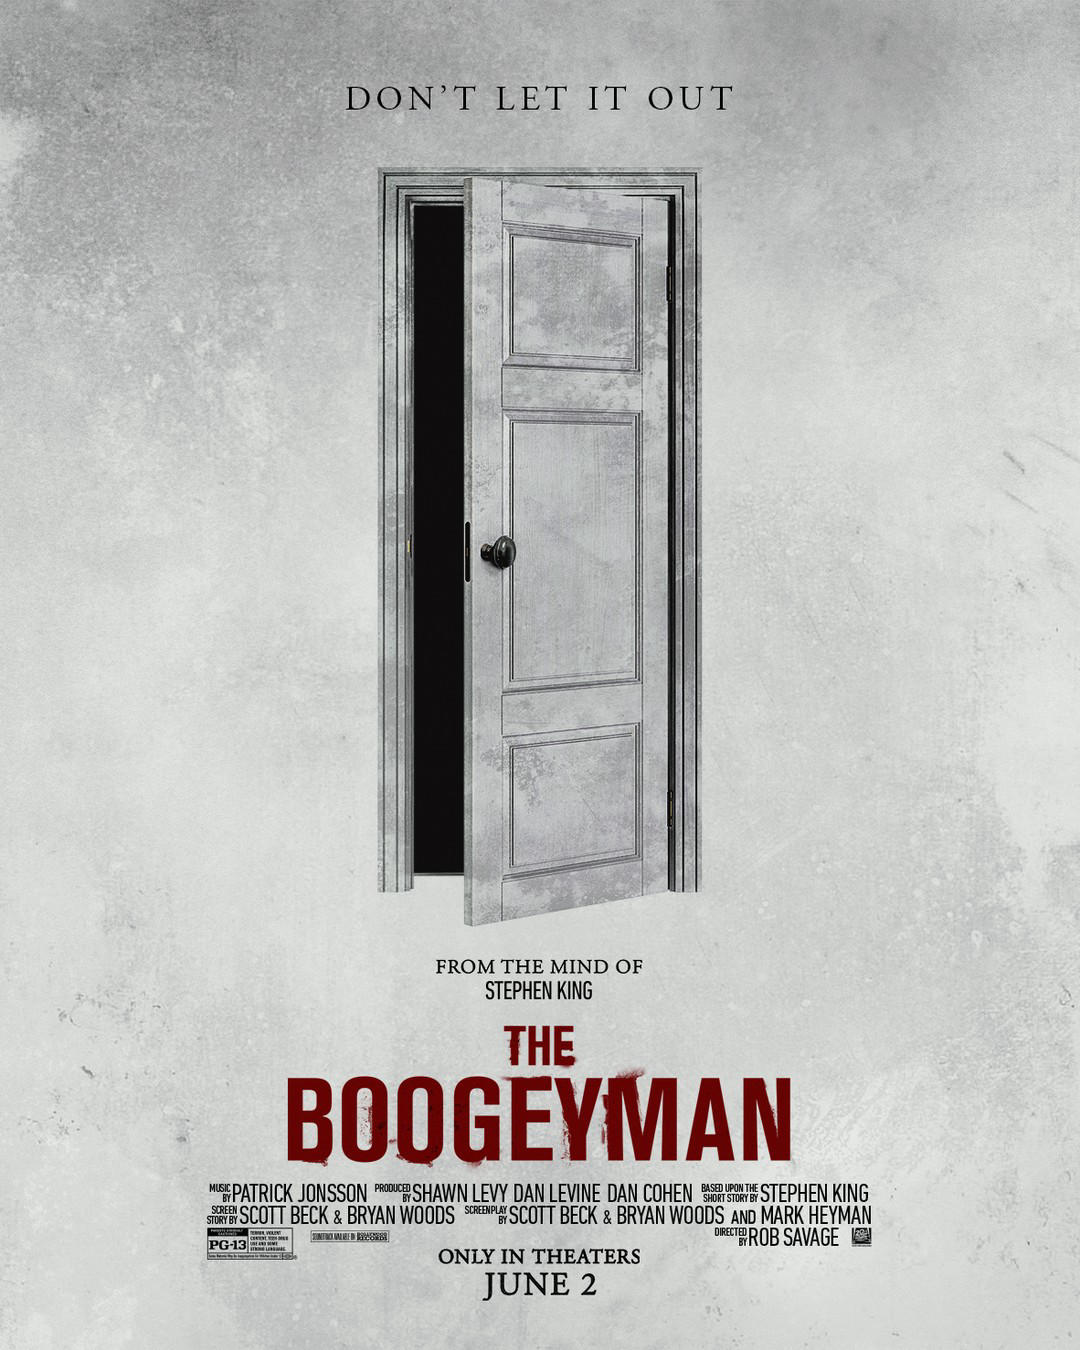 Check out the new poster for #TheBoogeyman, in theaters June 2